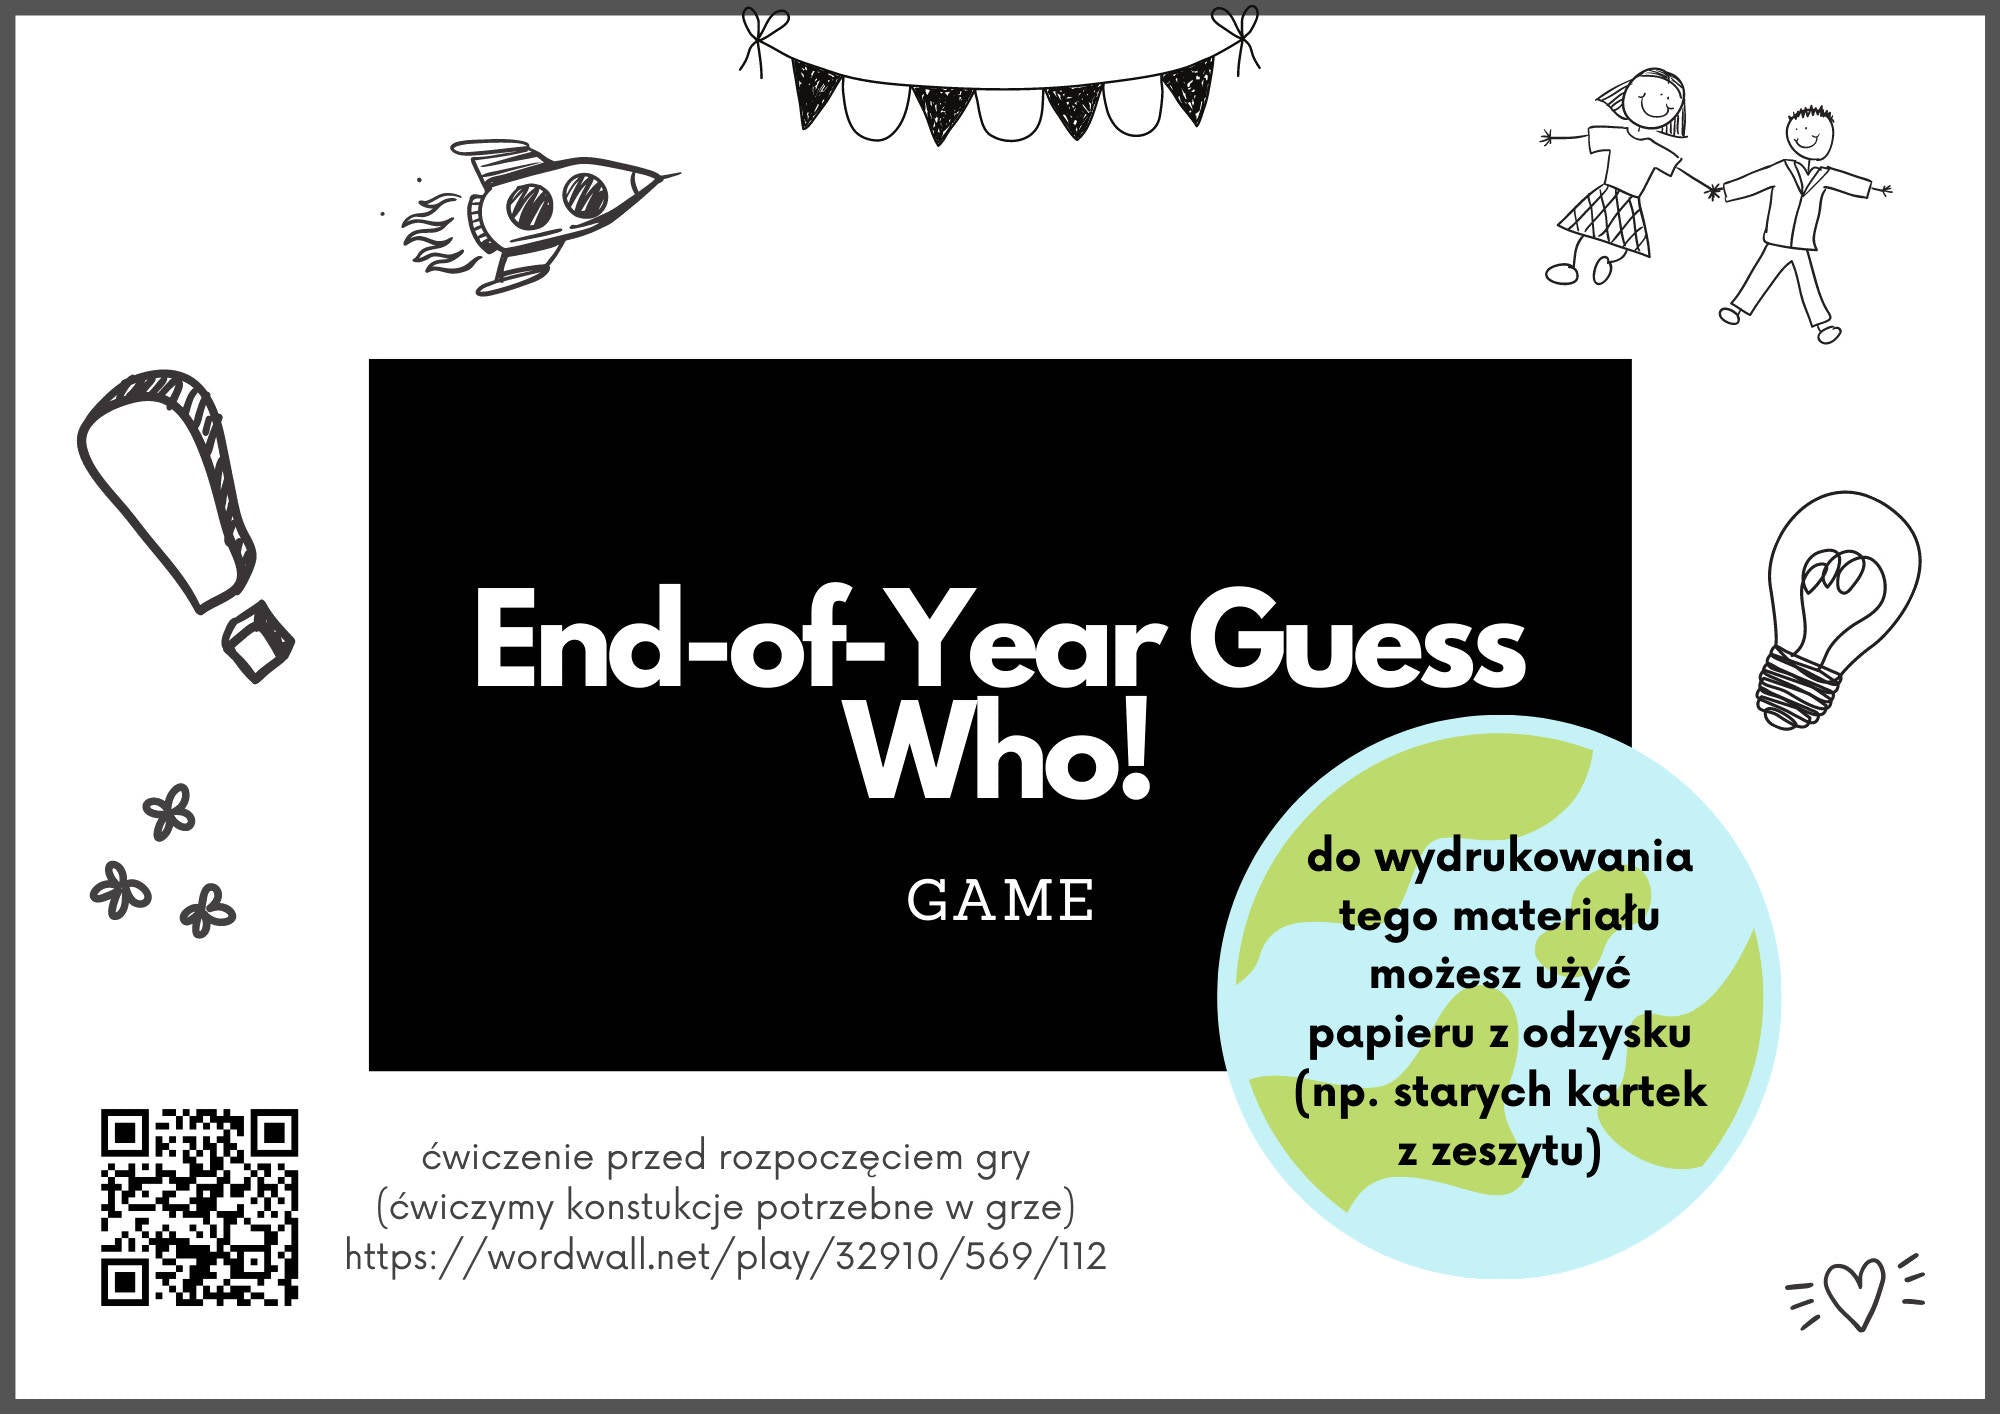 End-of-Year Guess Who! (game)